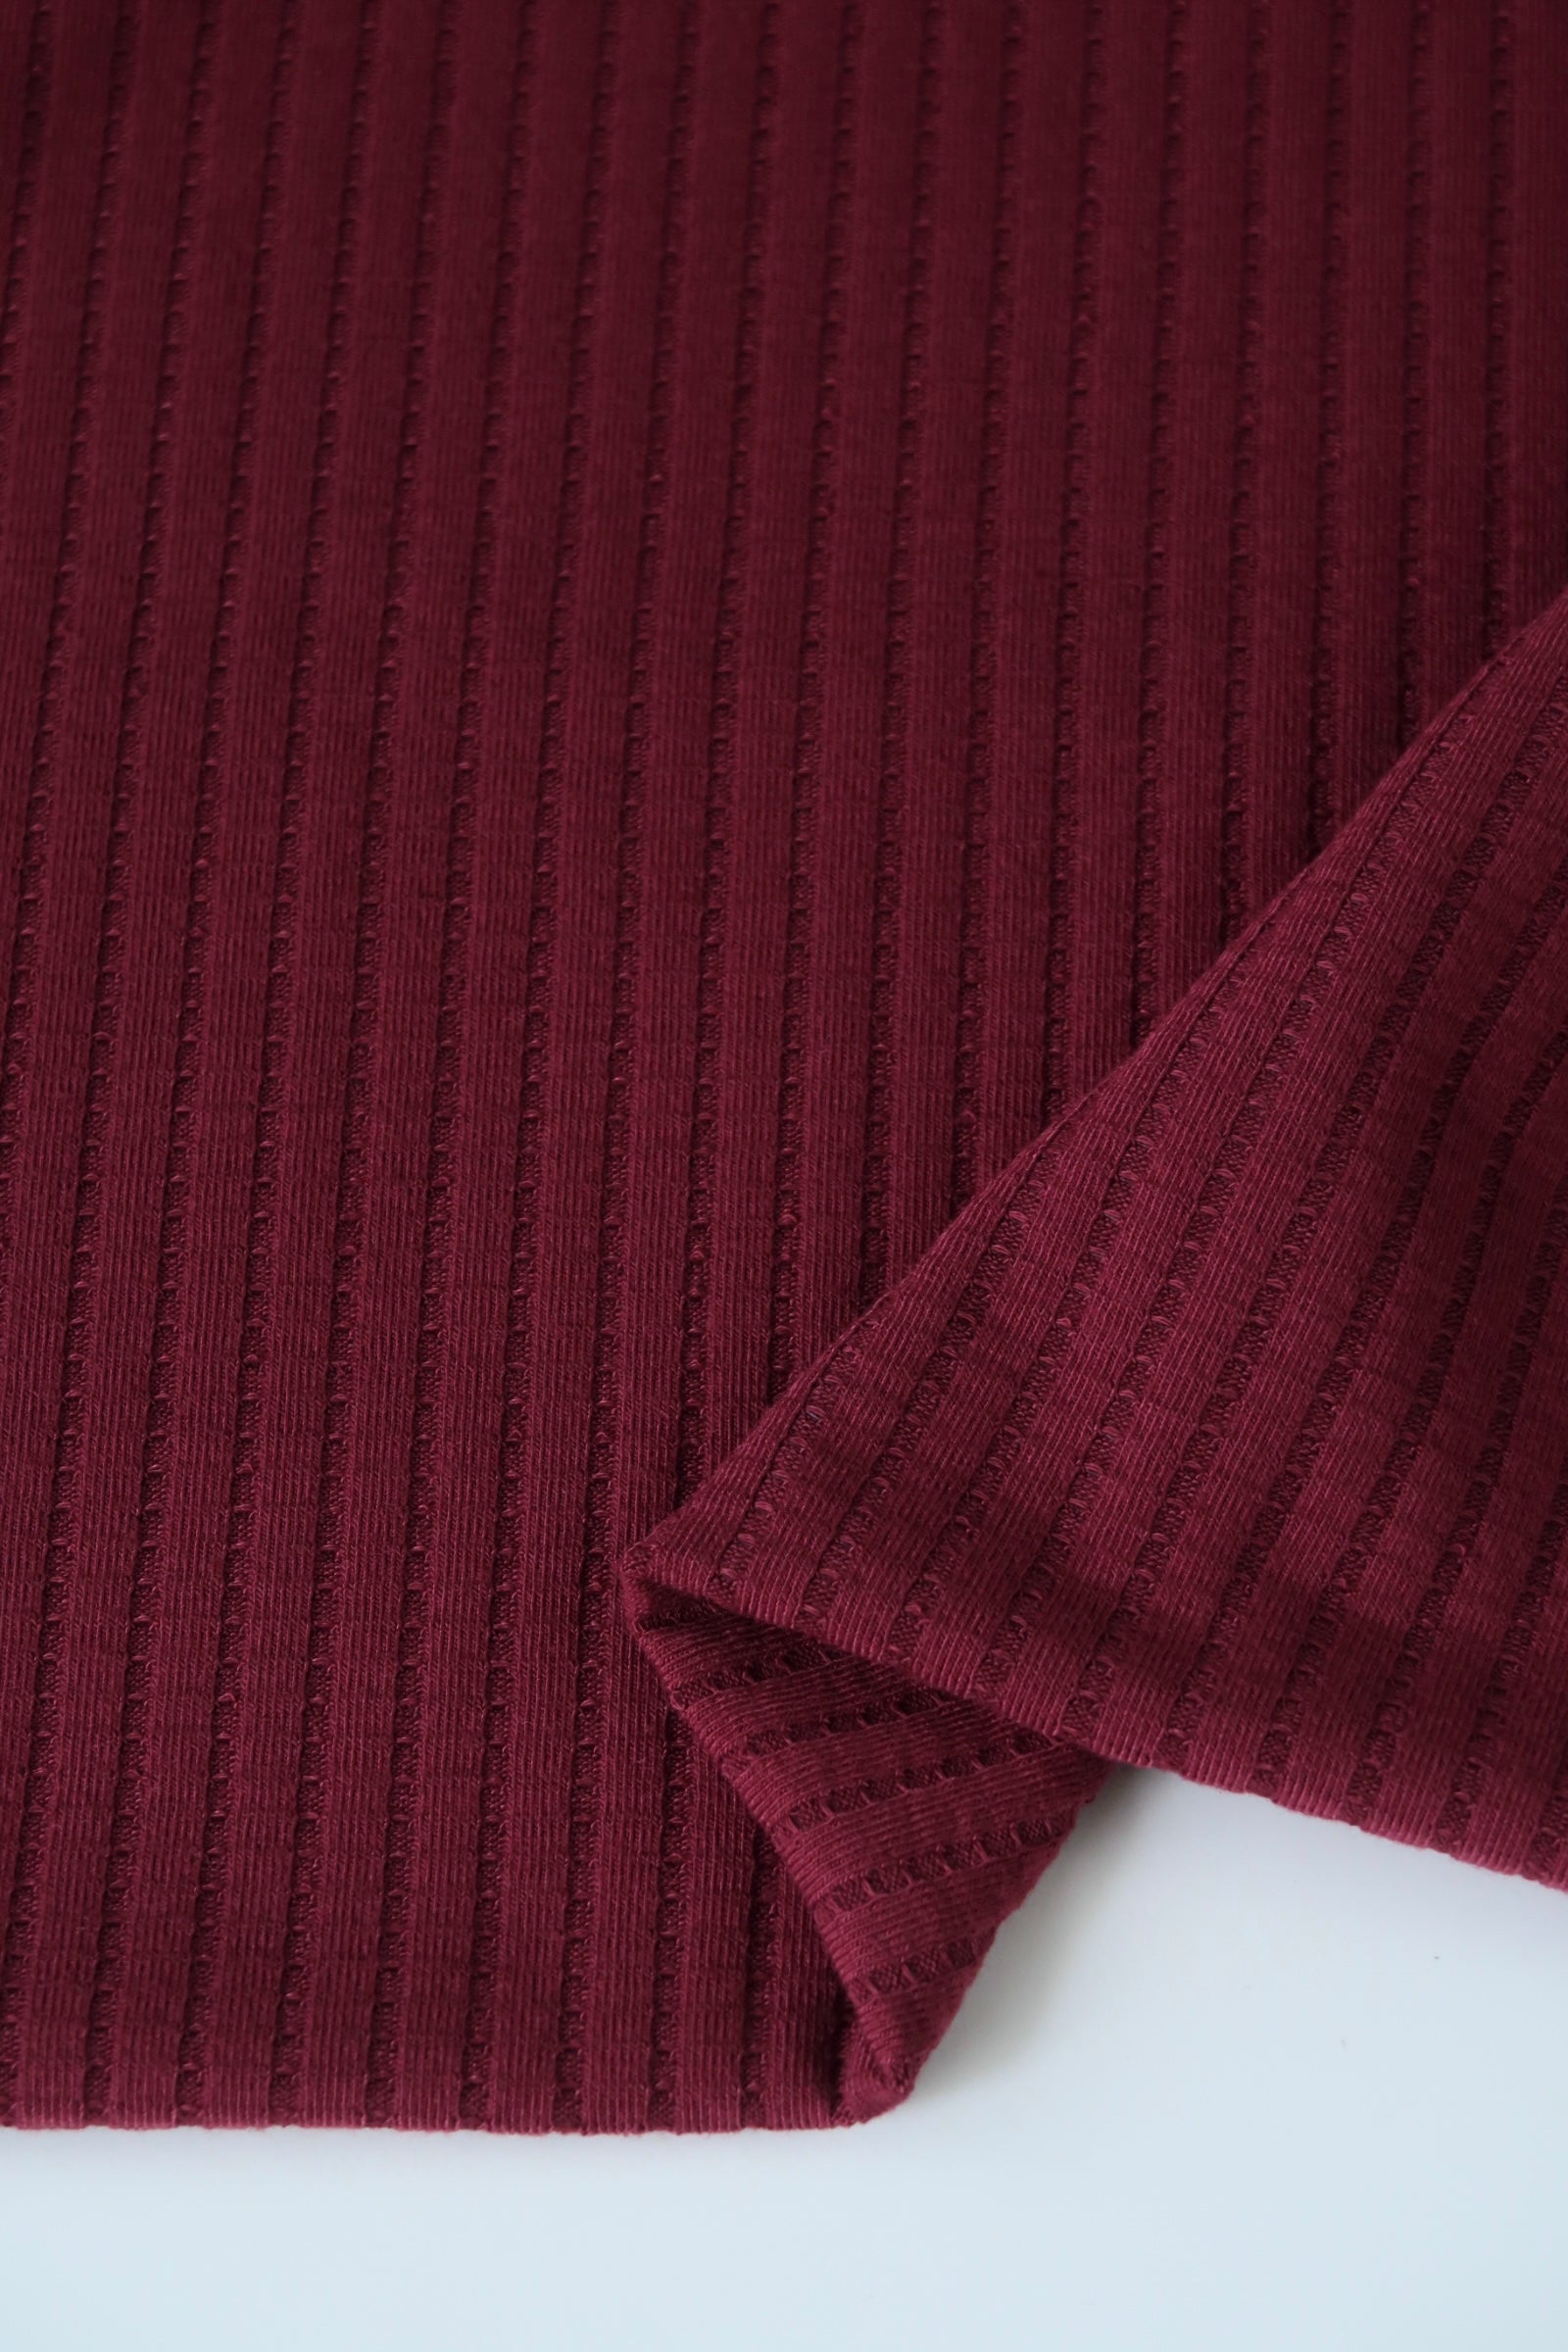 Burgundy Outdoor Chenille - The Fabric Market